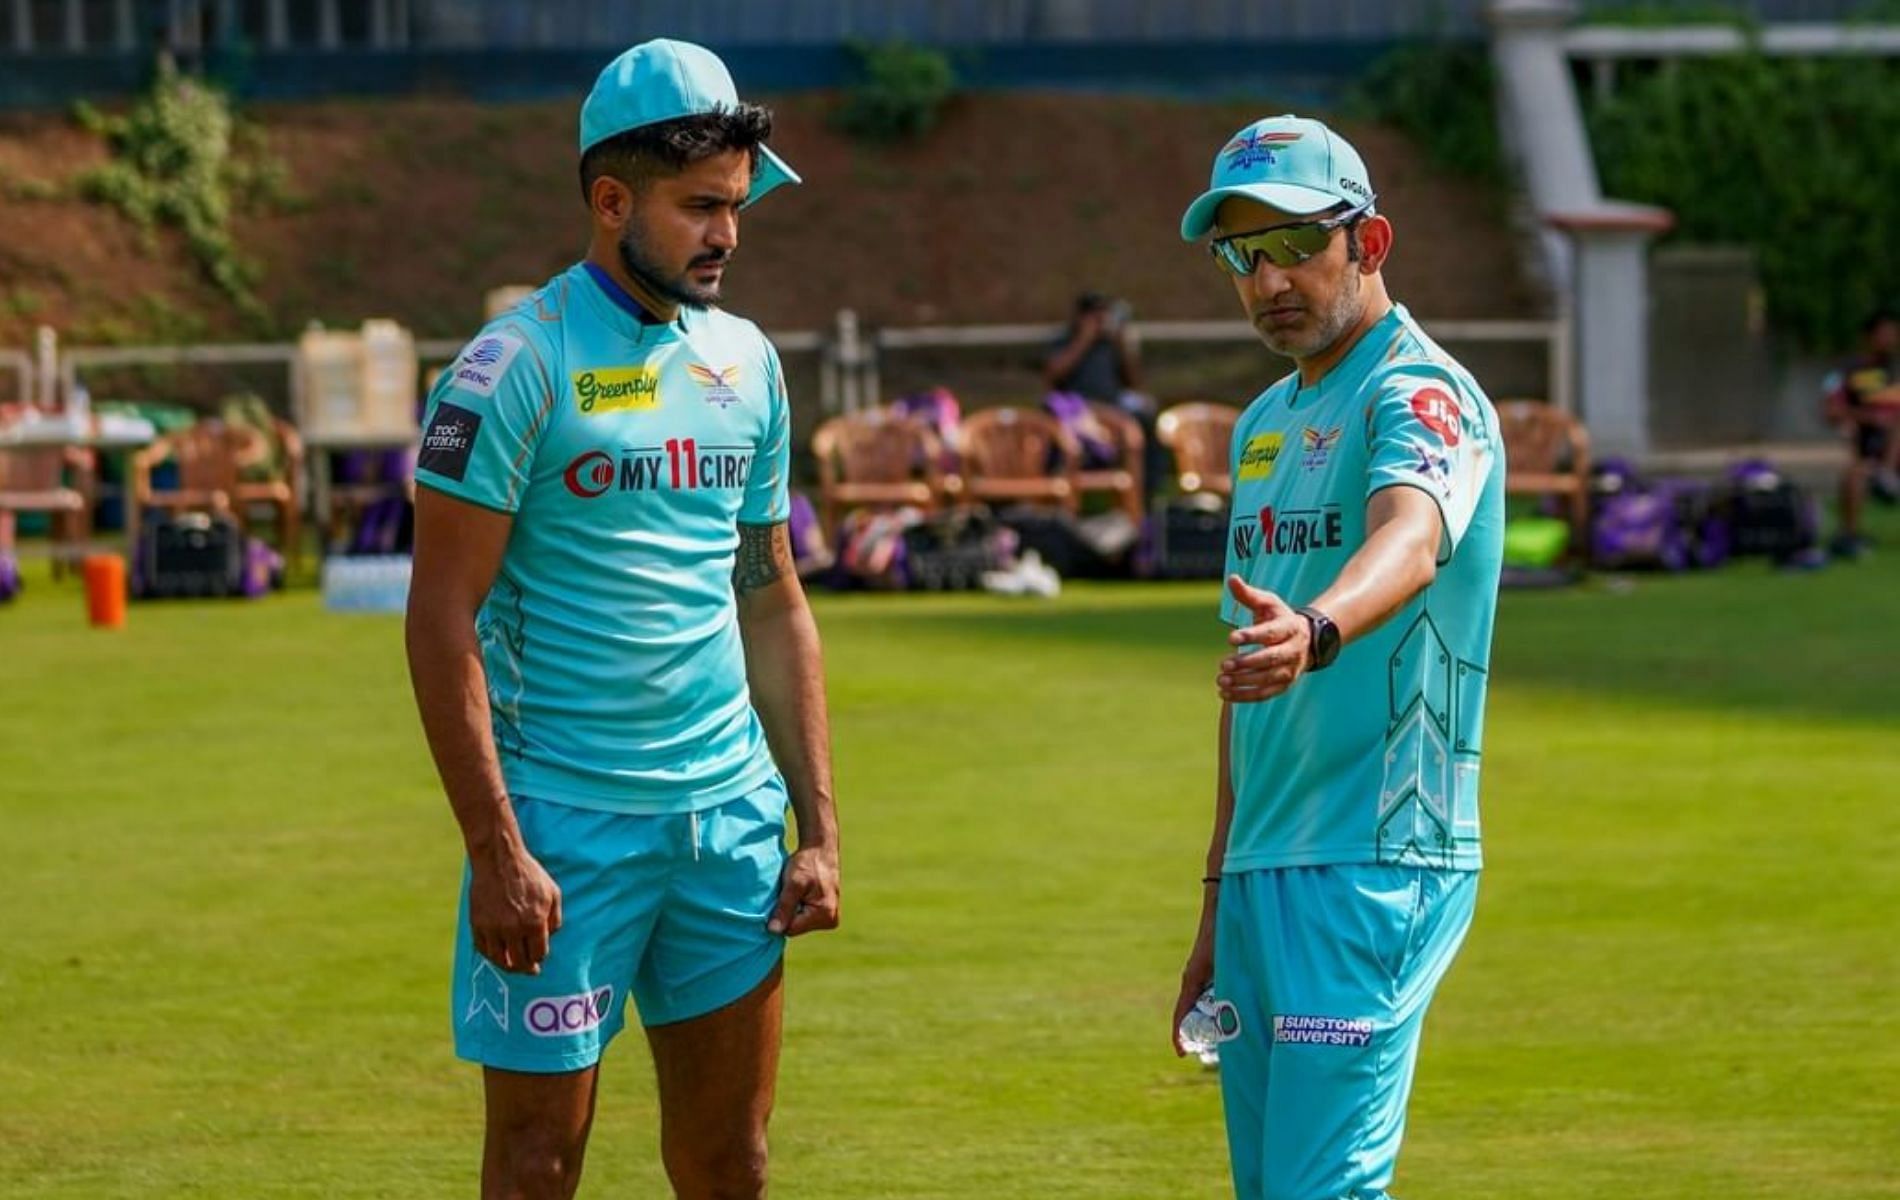 IPL 2023 Auction LIVE, Manish Pandey, Lucknow Super Giants, LSG Retention, LSG Released Players List, IPL 2023 LIVE, Manish Pandey IPL, IPL 2023 Retention